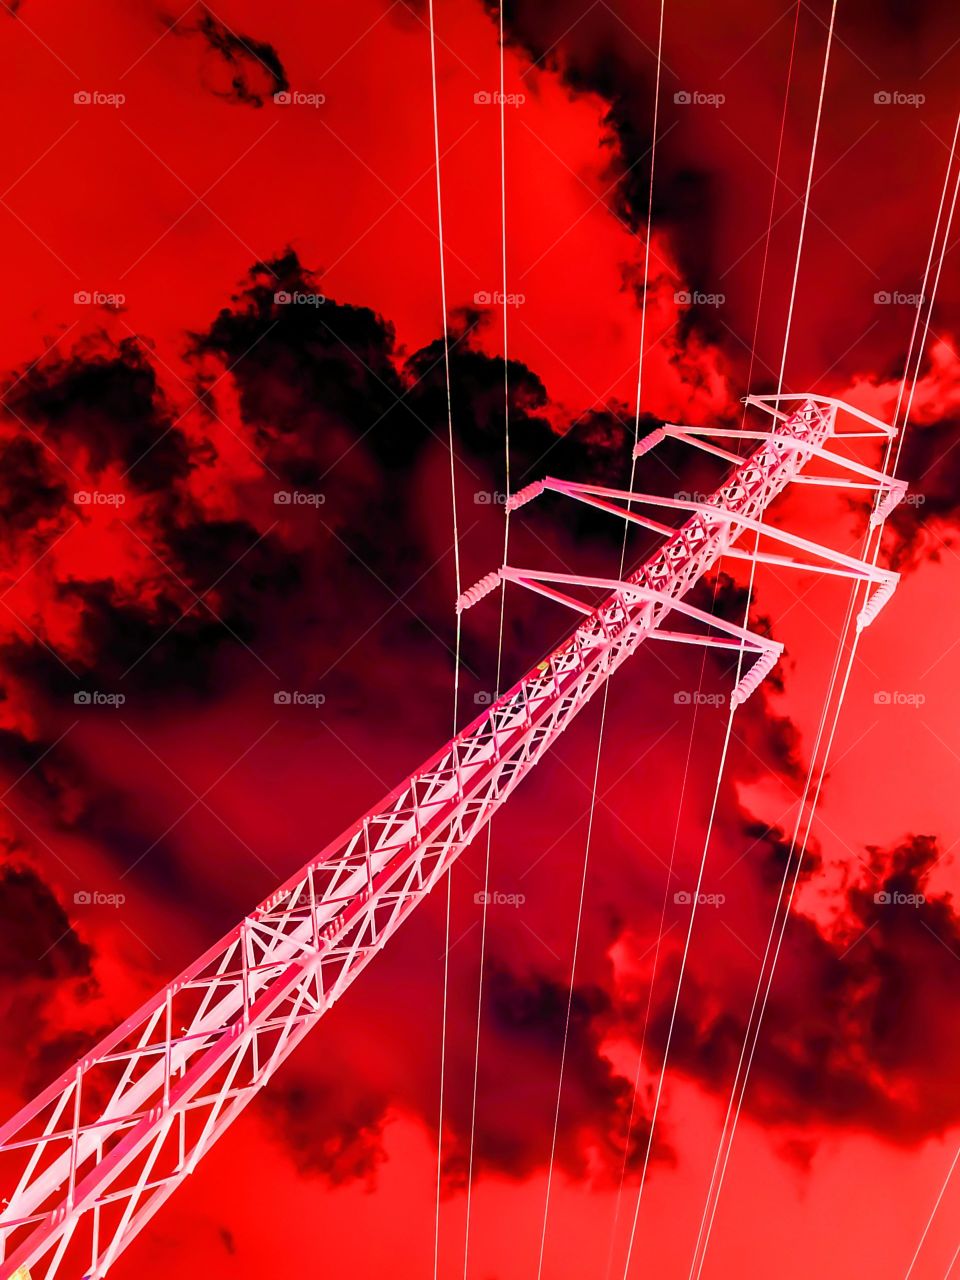 Red Power Tower. Negative power line tower image filtered in red.